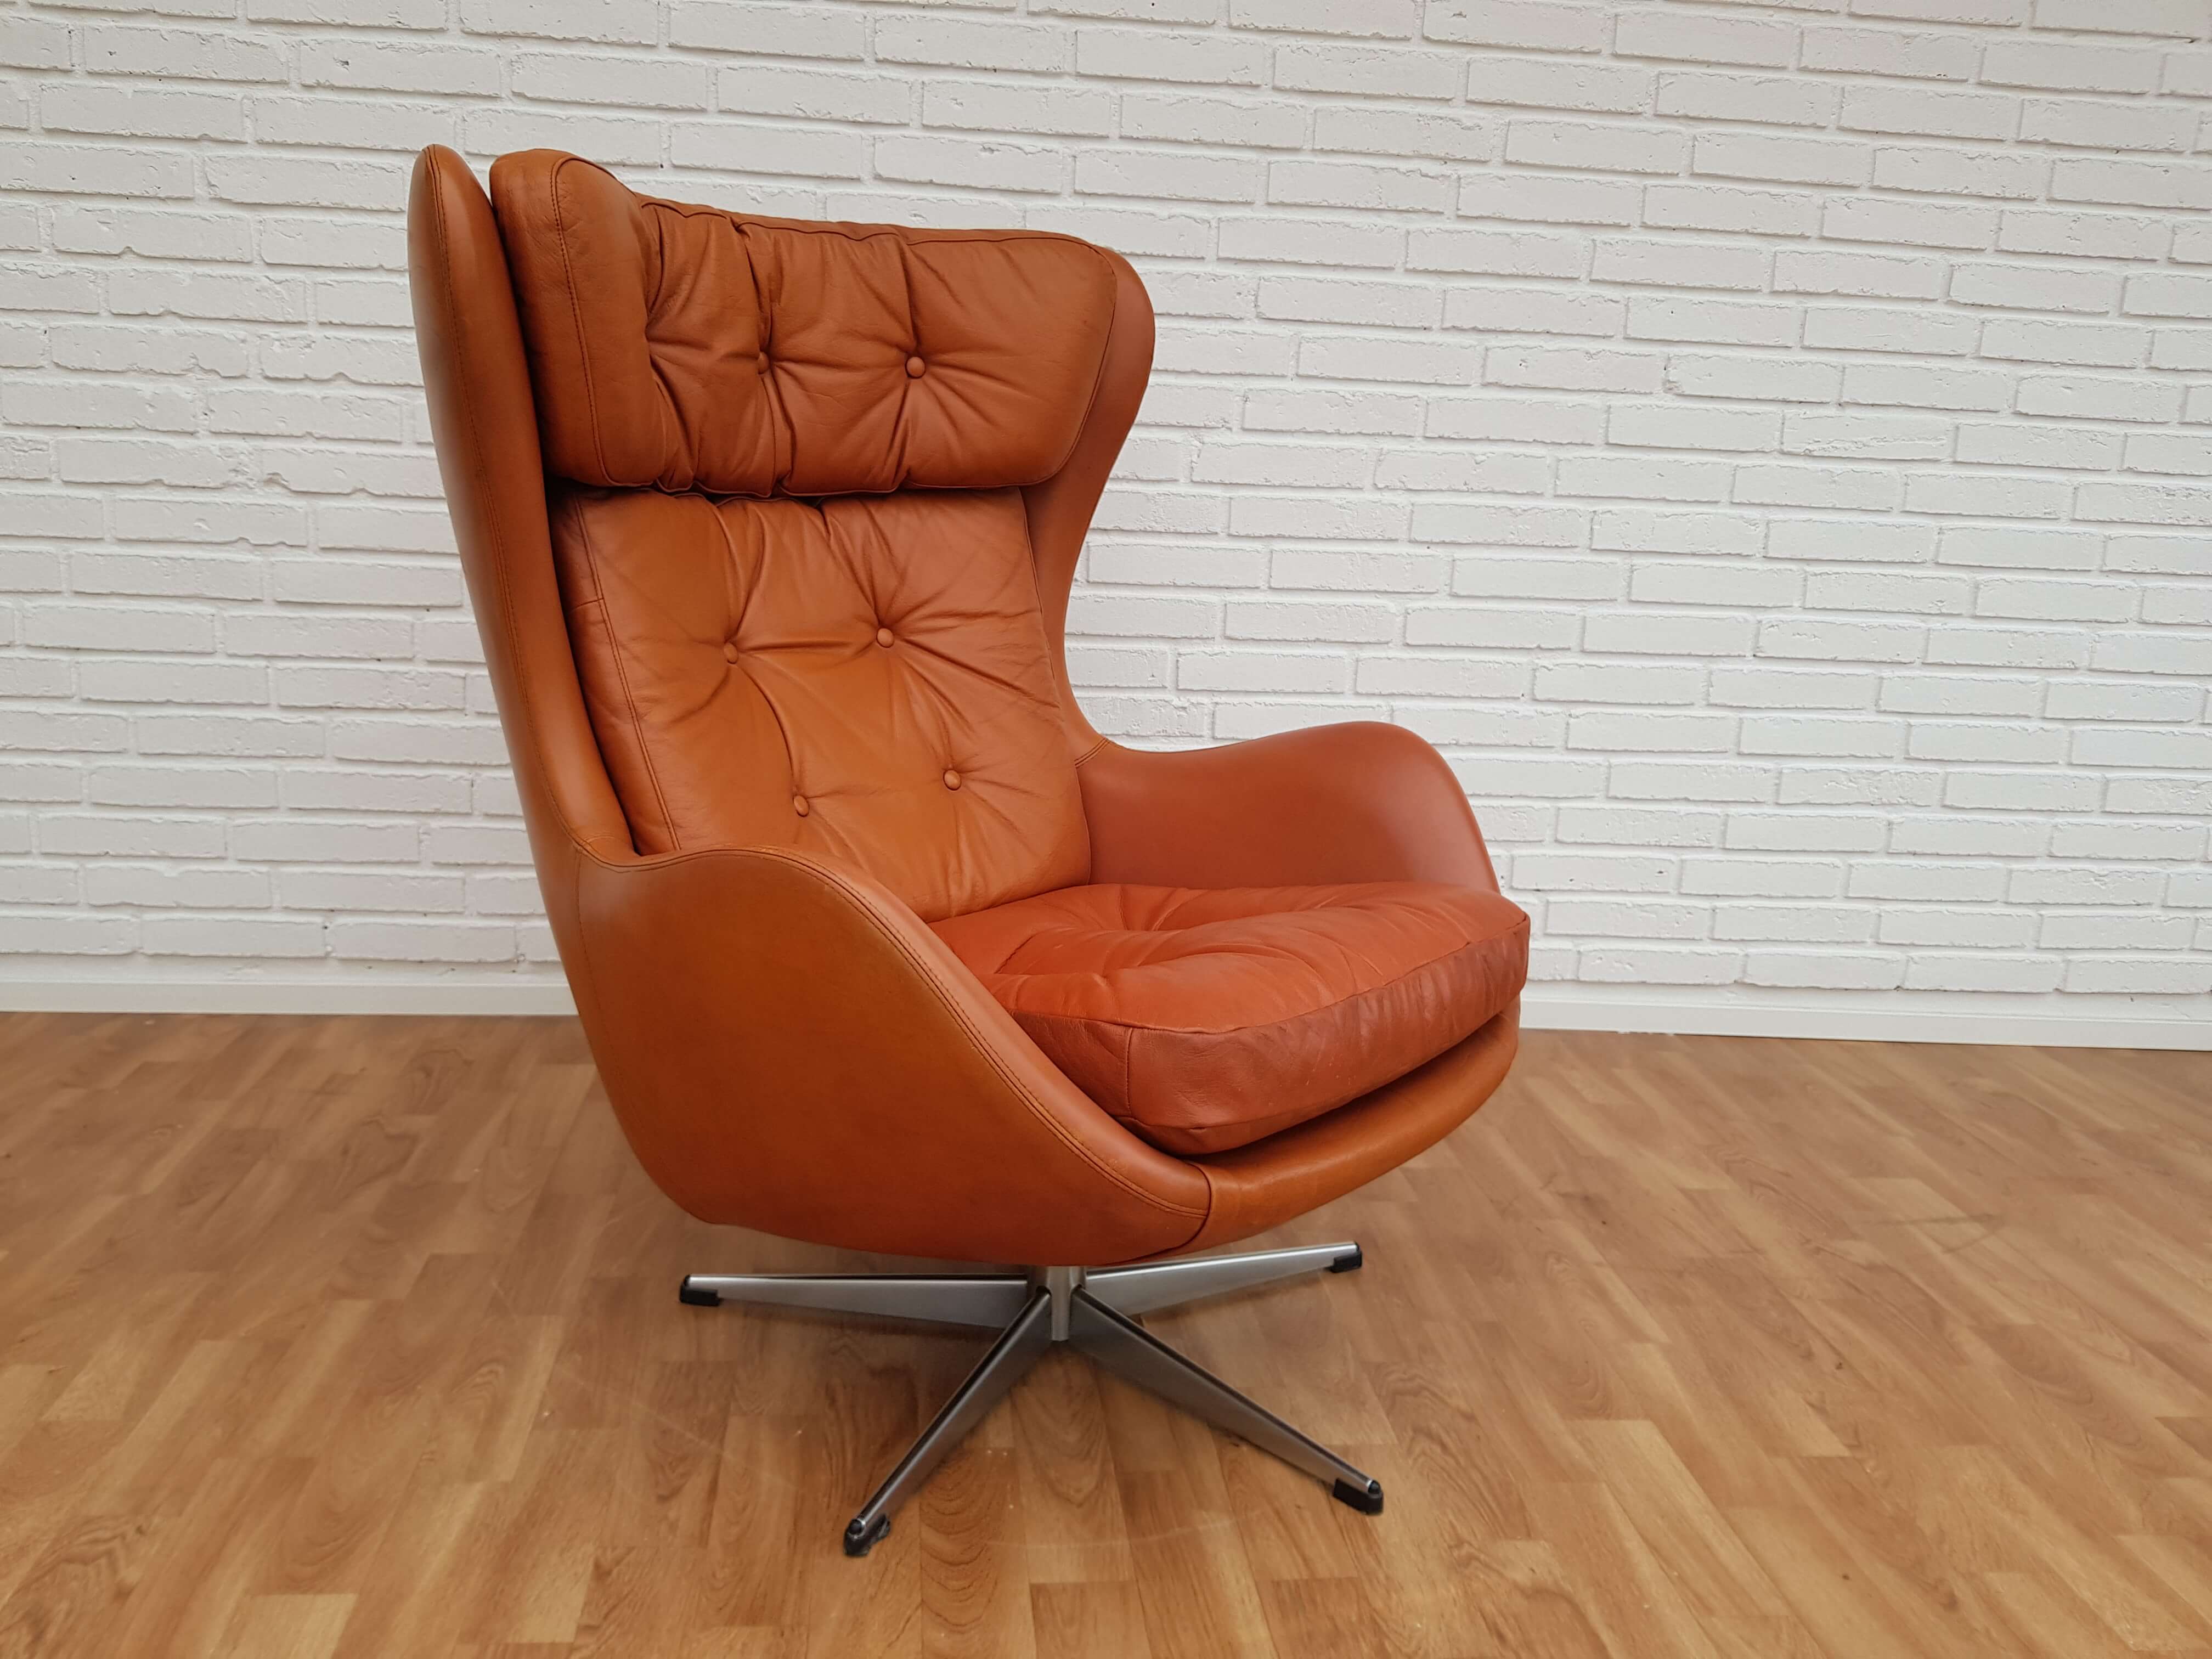 Danish lounge chair, Henry Walter Klein for Bramin, 70s, renewed leather